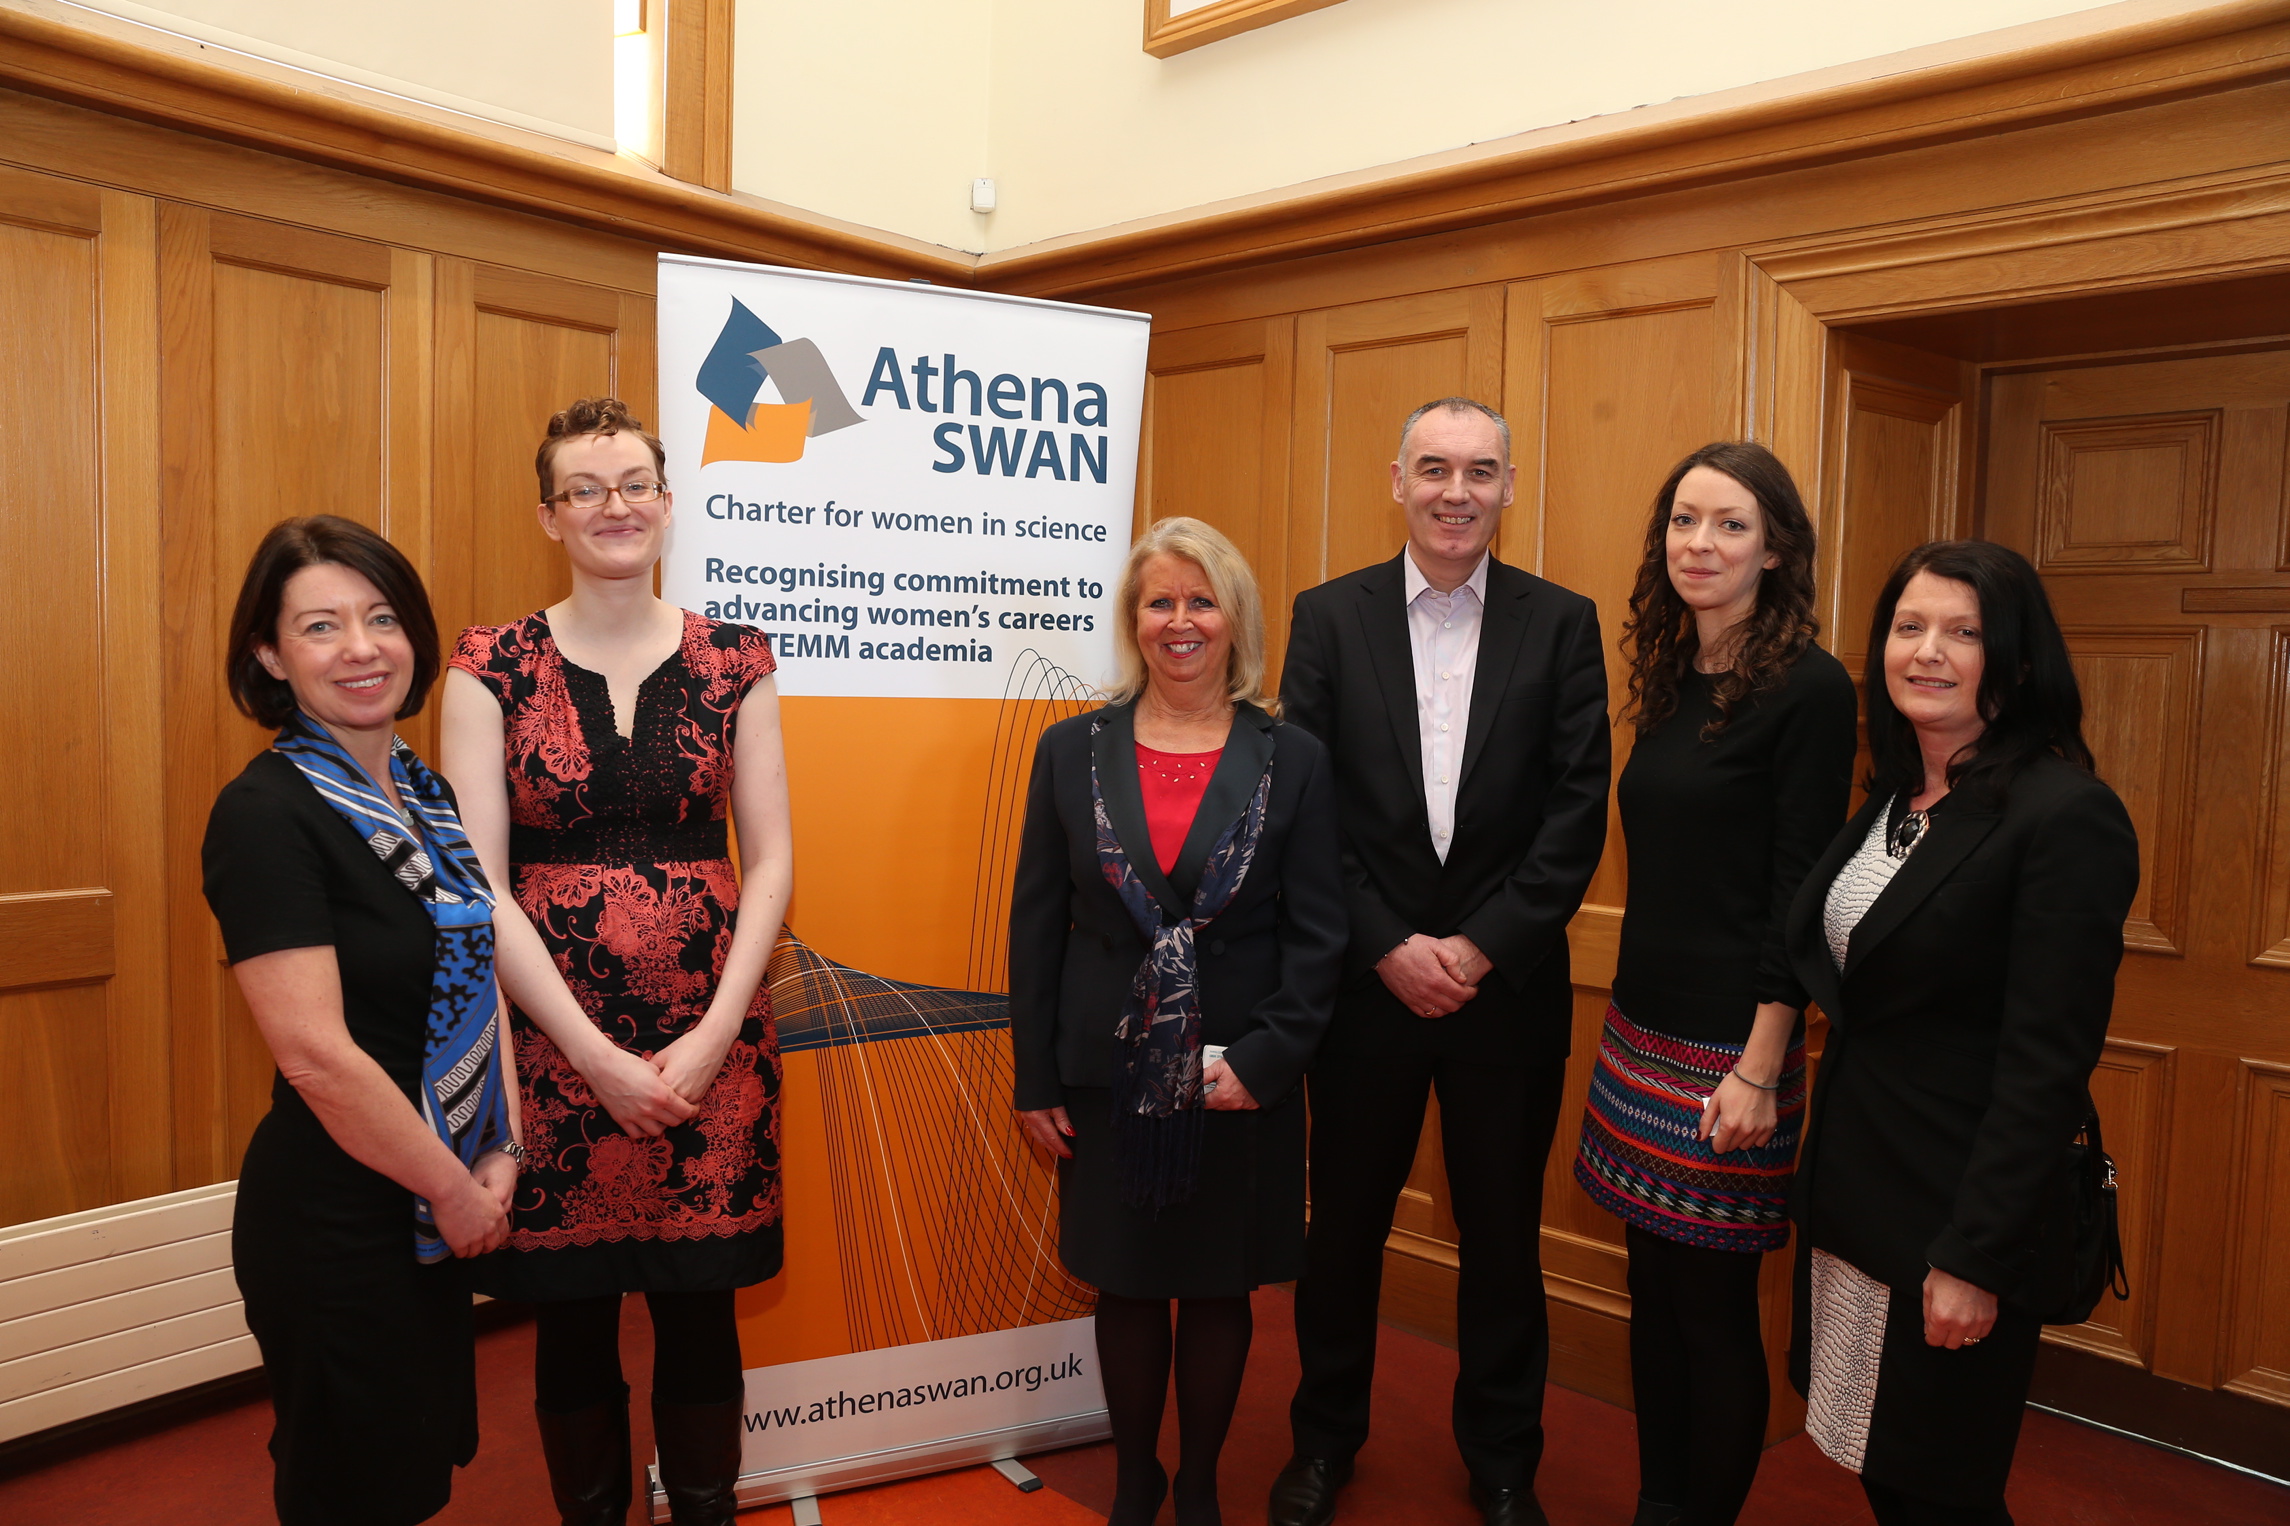 TCGEL team with Trinity Vice Provost Linda Hogan at the launch of the Athen SWAN Charter